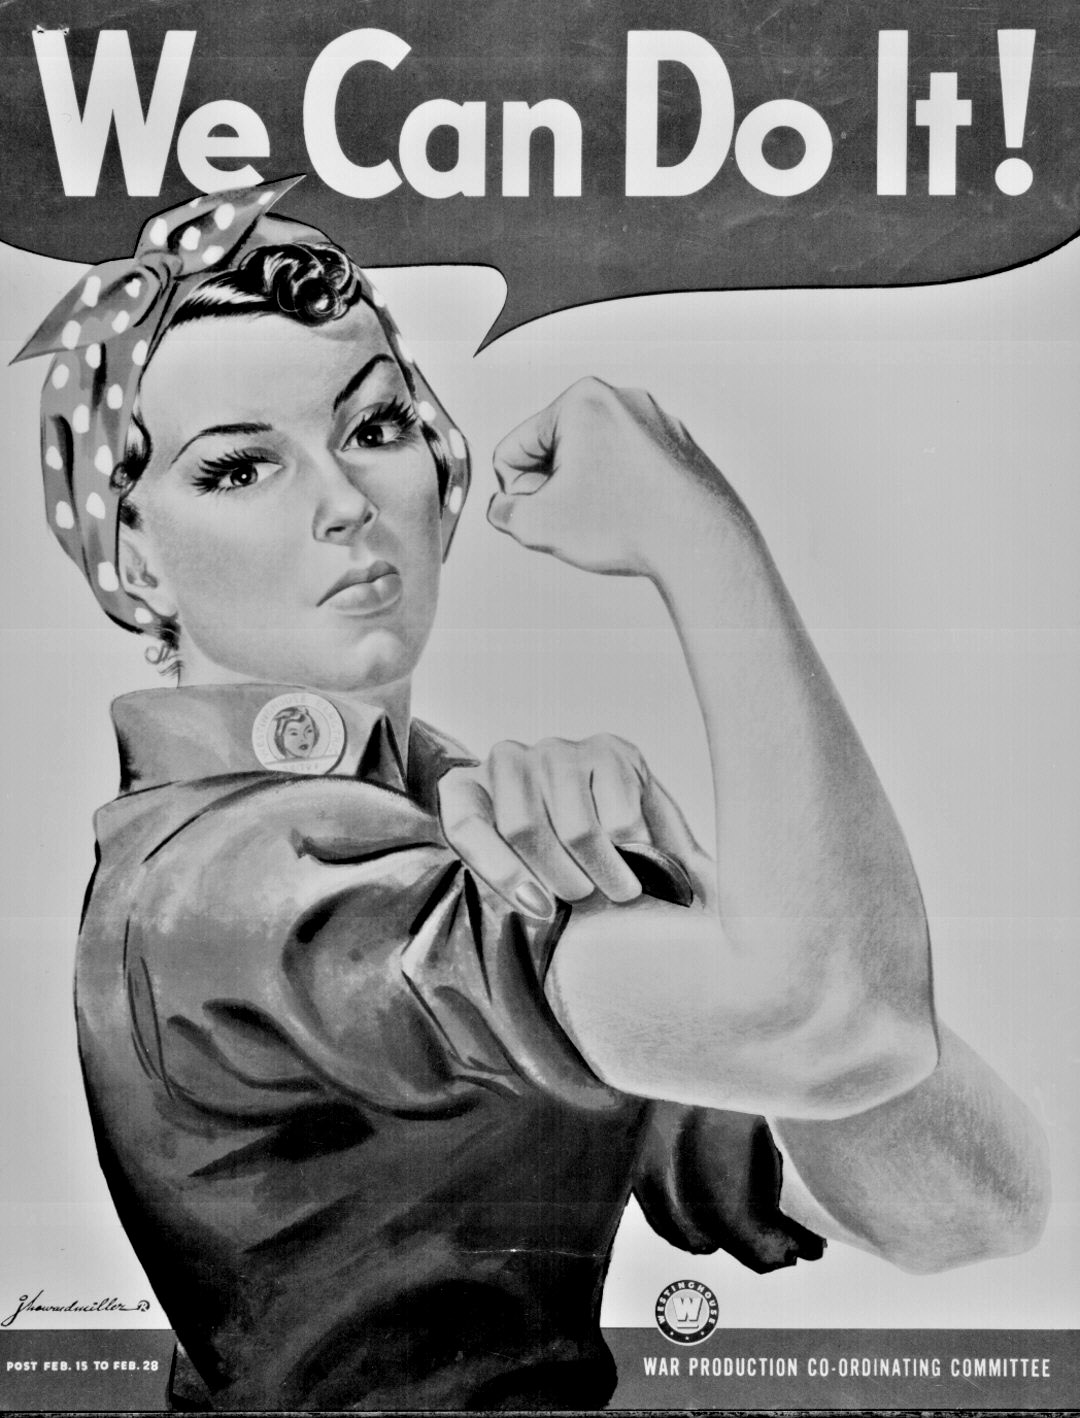 we can do it wallpaper,magazine,poster,album cover,art,photography